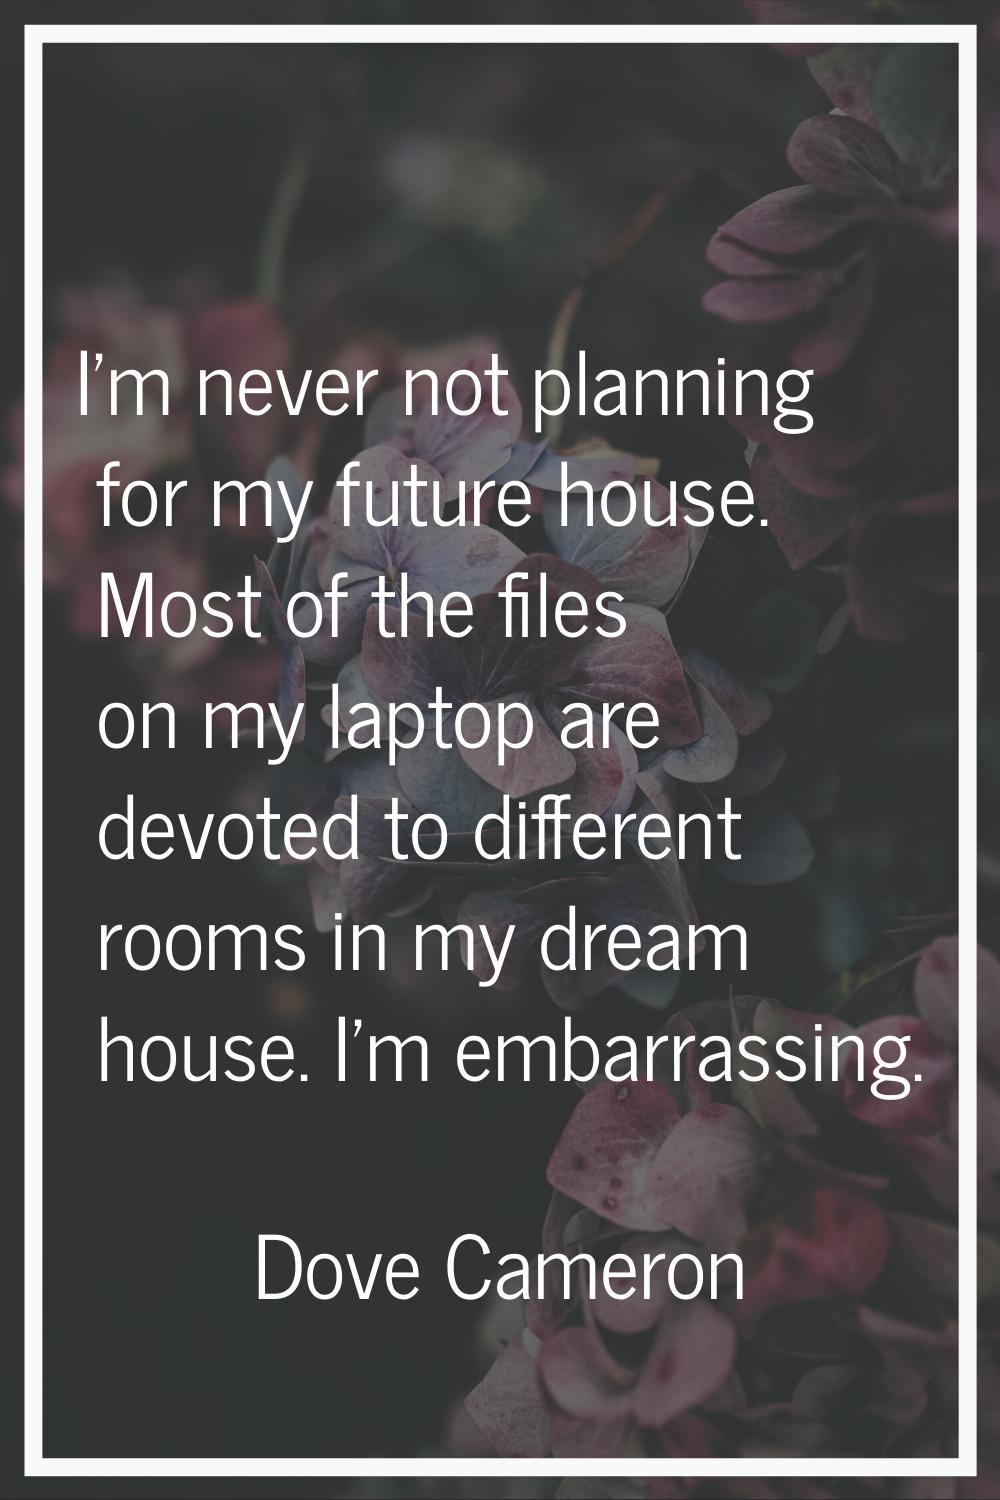 I'm never not planning for my future house. Most of the files on my laptop are devoted to different